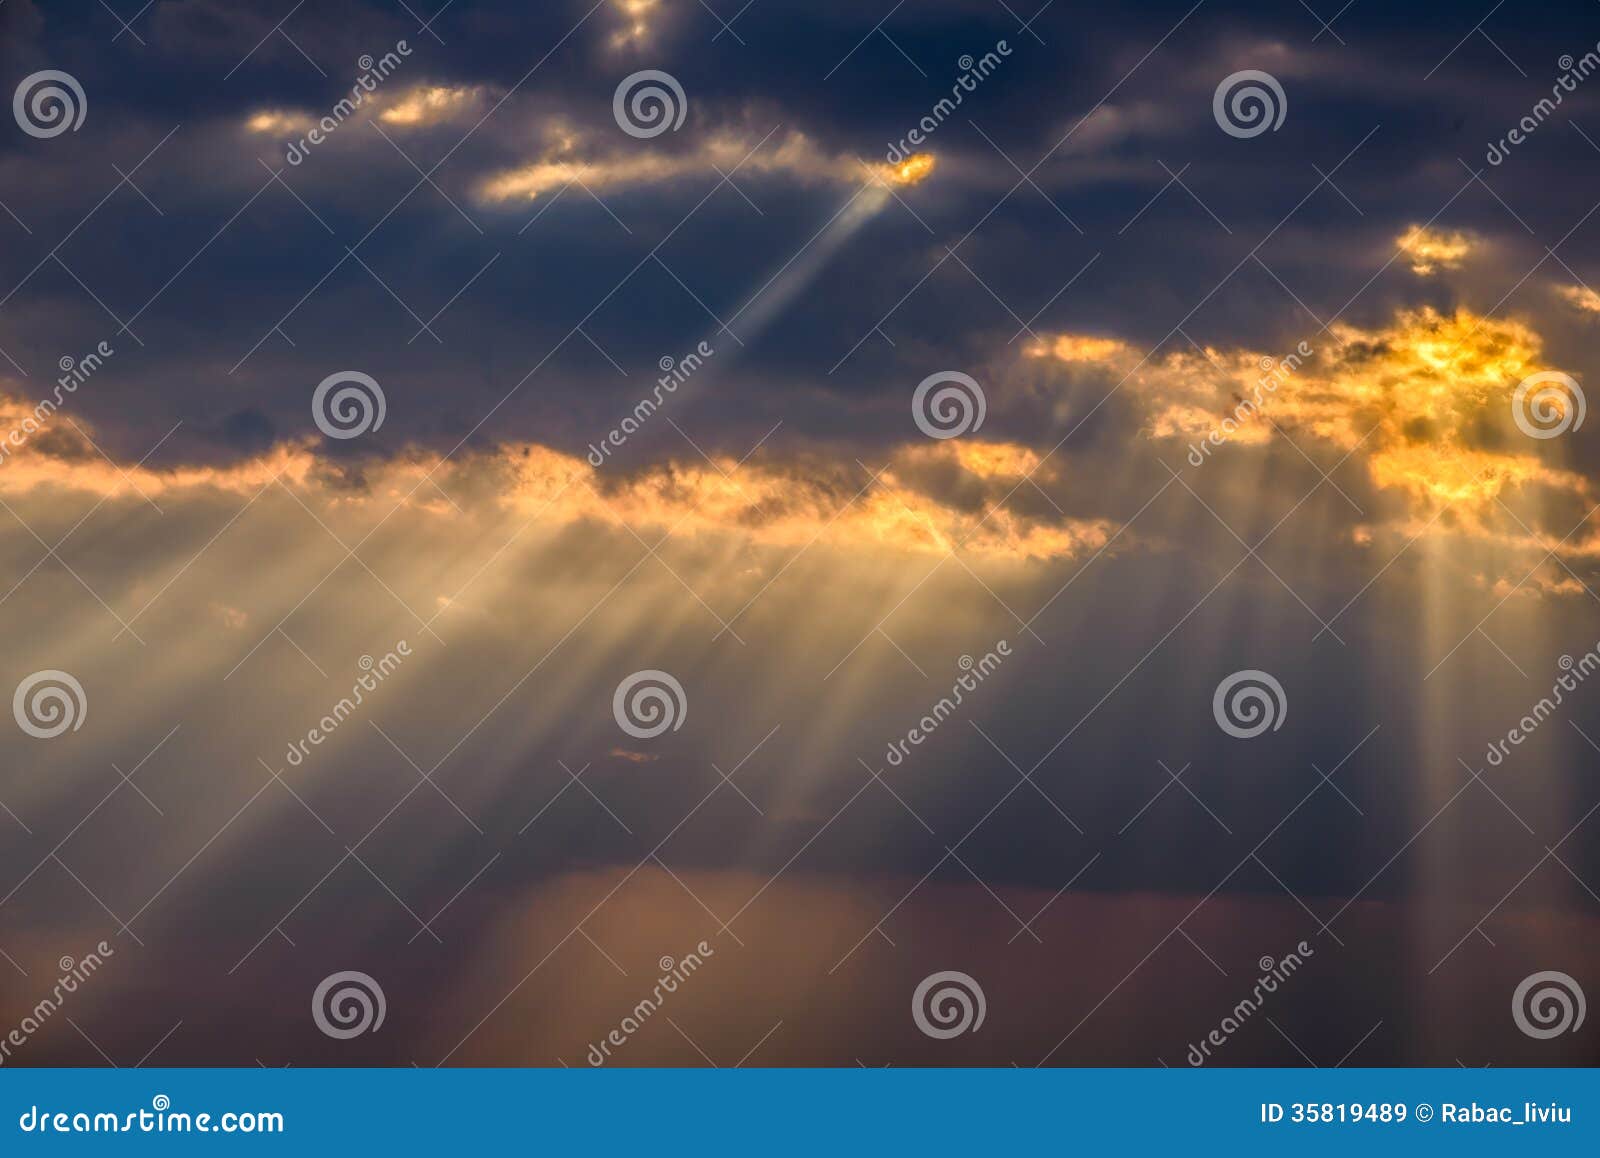 sunrays between the clouds